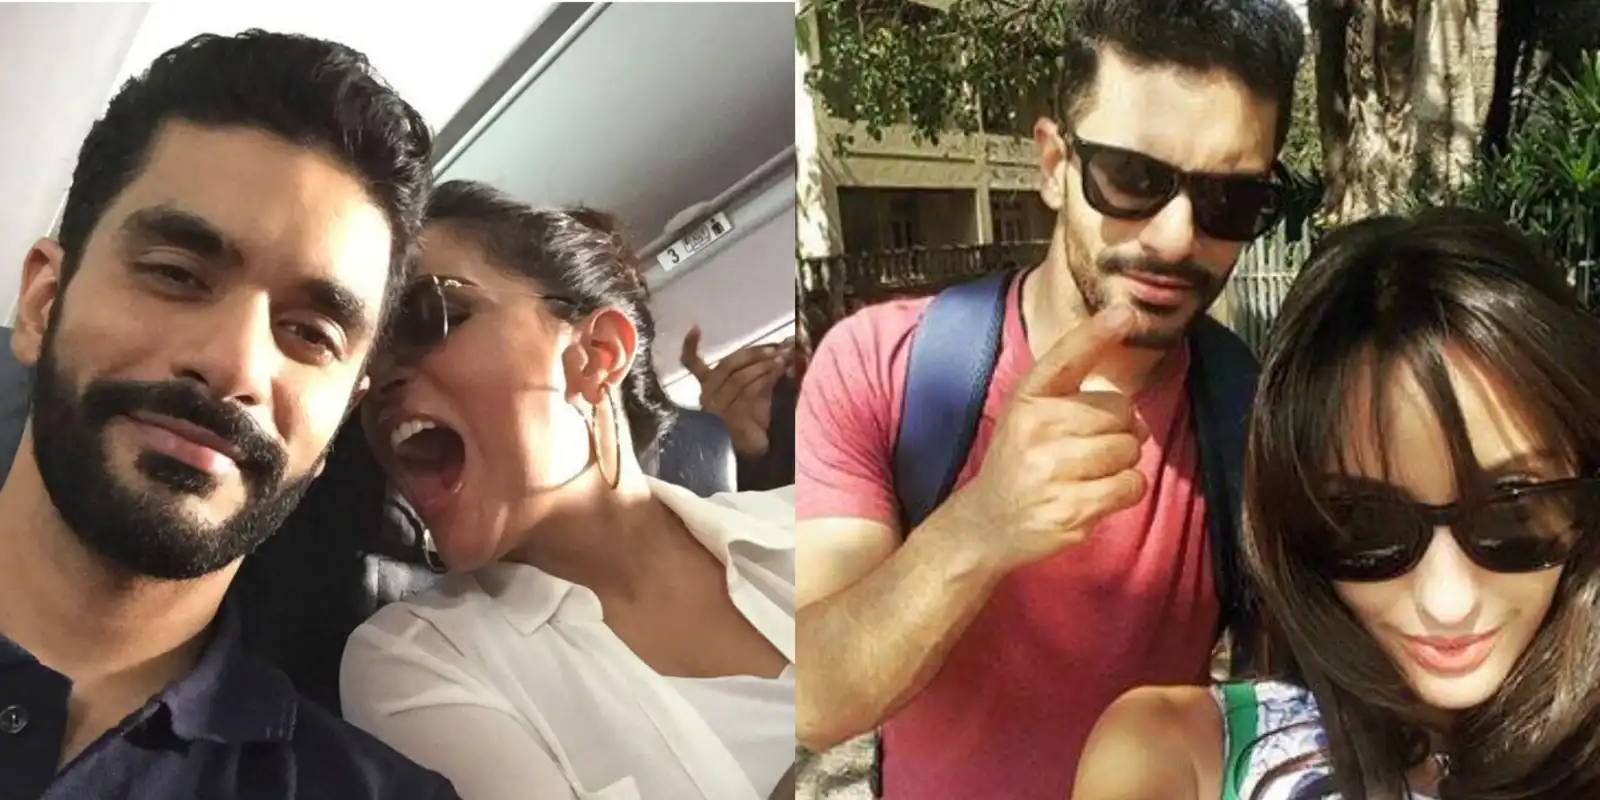 Did You Know About These Alleged Affairs Of Mr. Player, Angad Bedi?